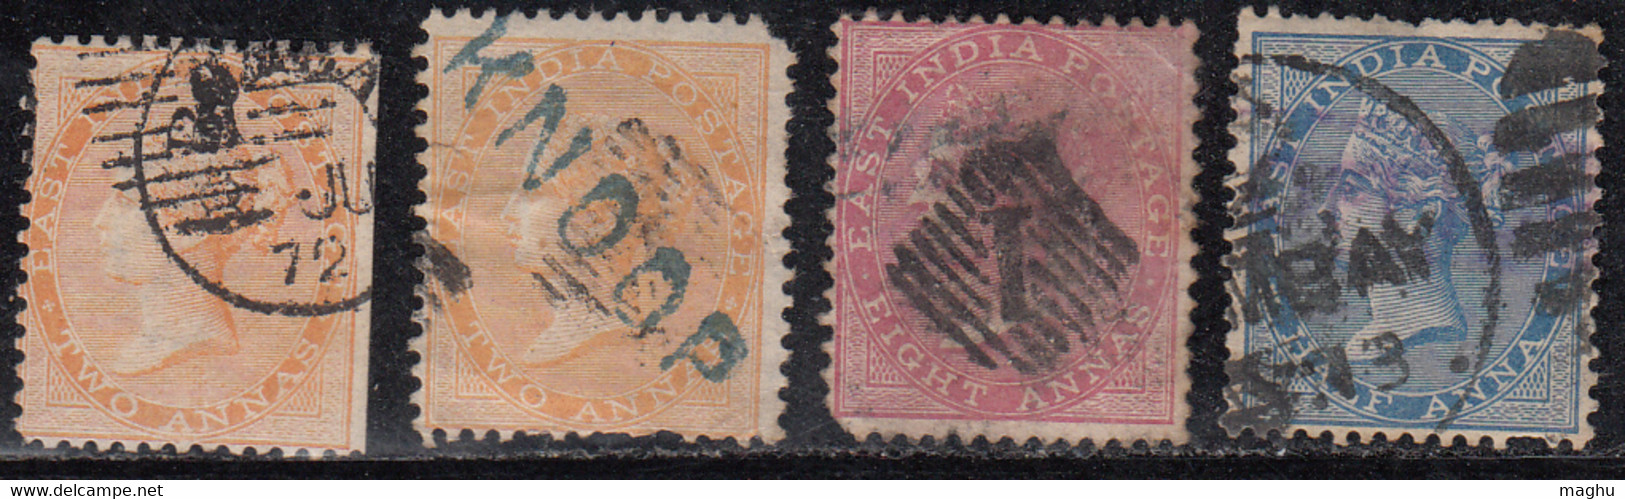 4 Diff., BOMBAY Cancellation, JC Tpye 4 And Local Varities On QV British East India Used, (stamps Damaged) - 1854 Compagnie Des Indes